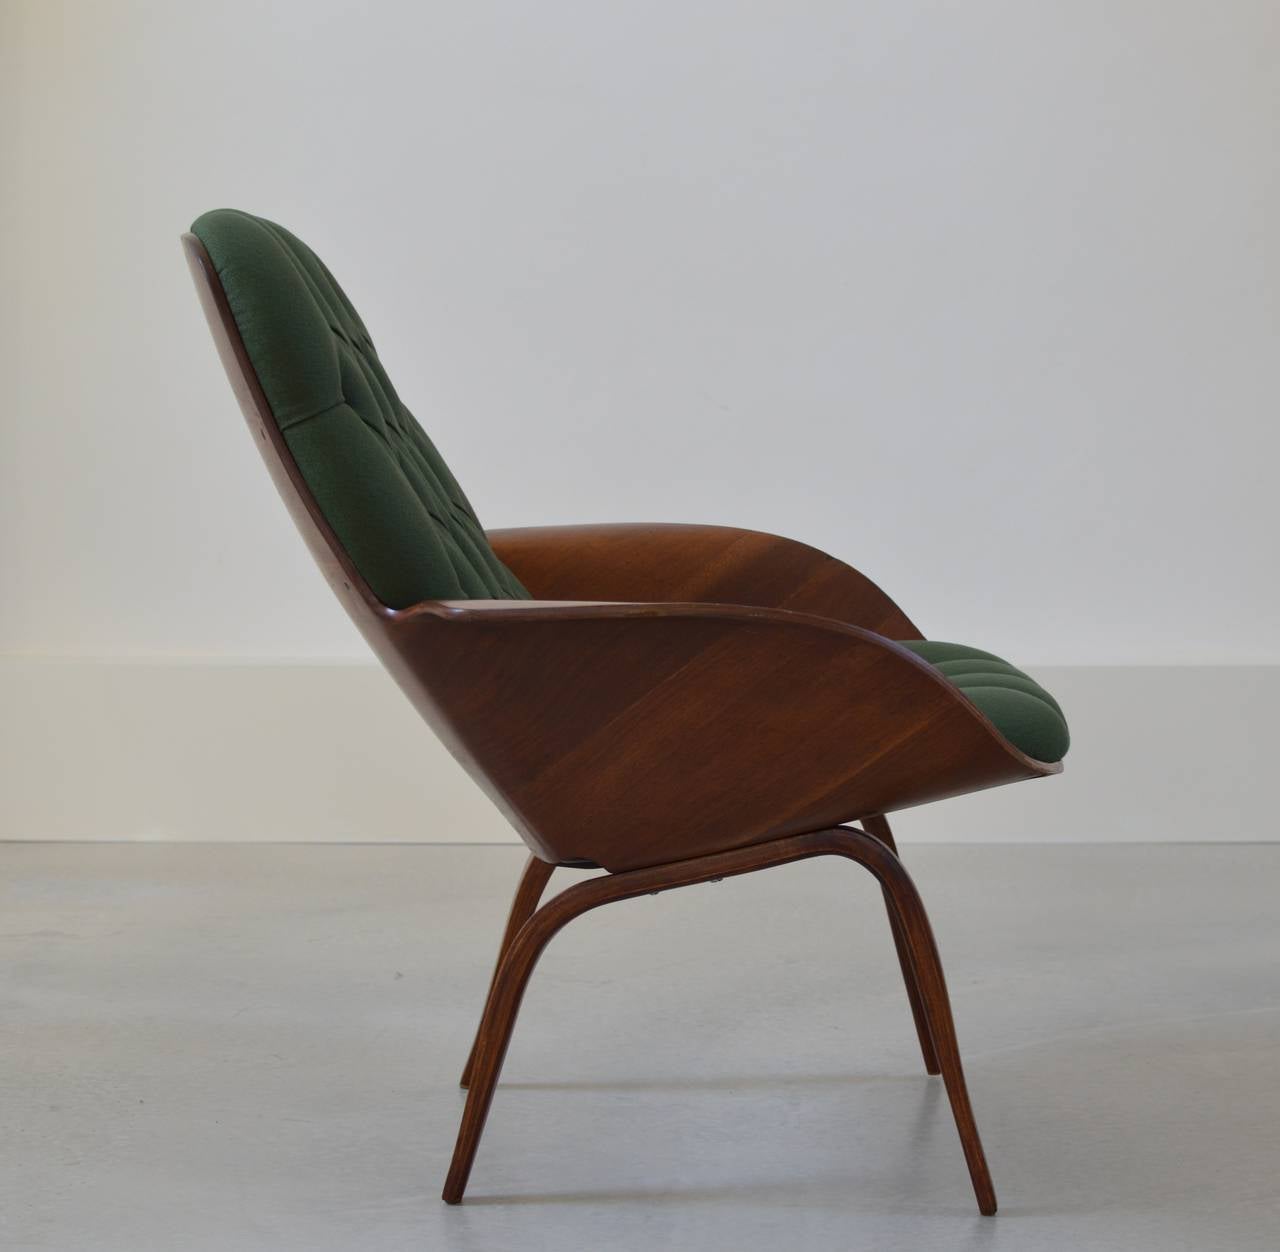 Walnut bentwood 1950's Lounge Chair by George Mulhauser for Playcraft fully restored and upholstered with green cotton tufted upholstery with buttons.